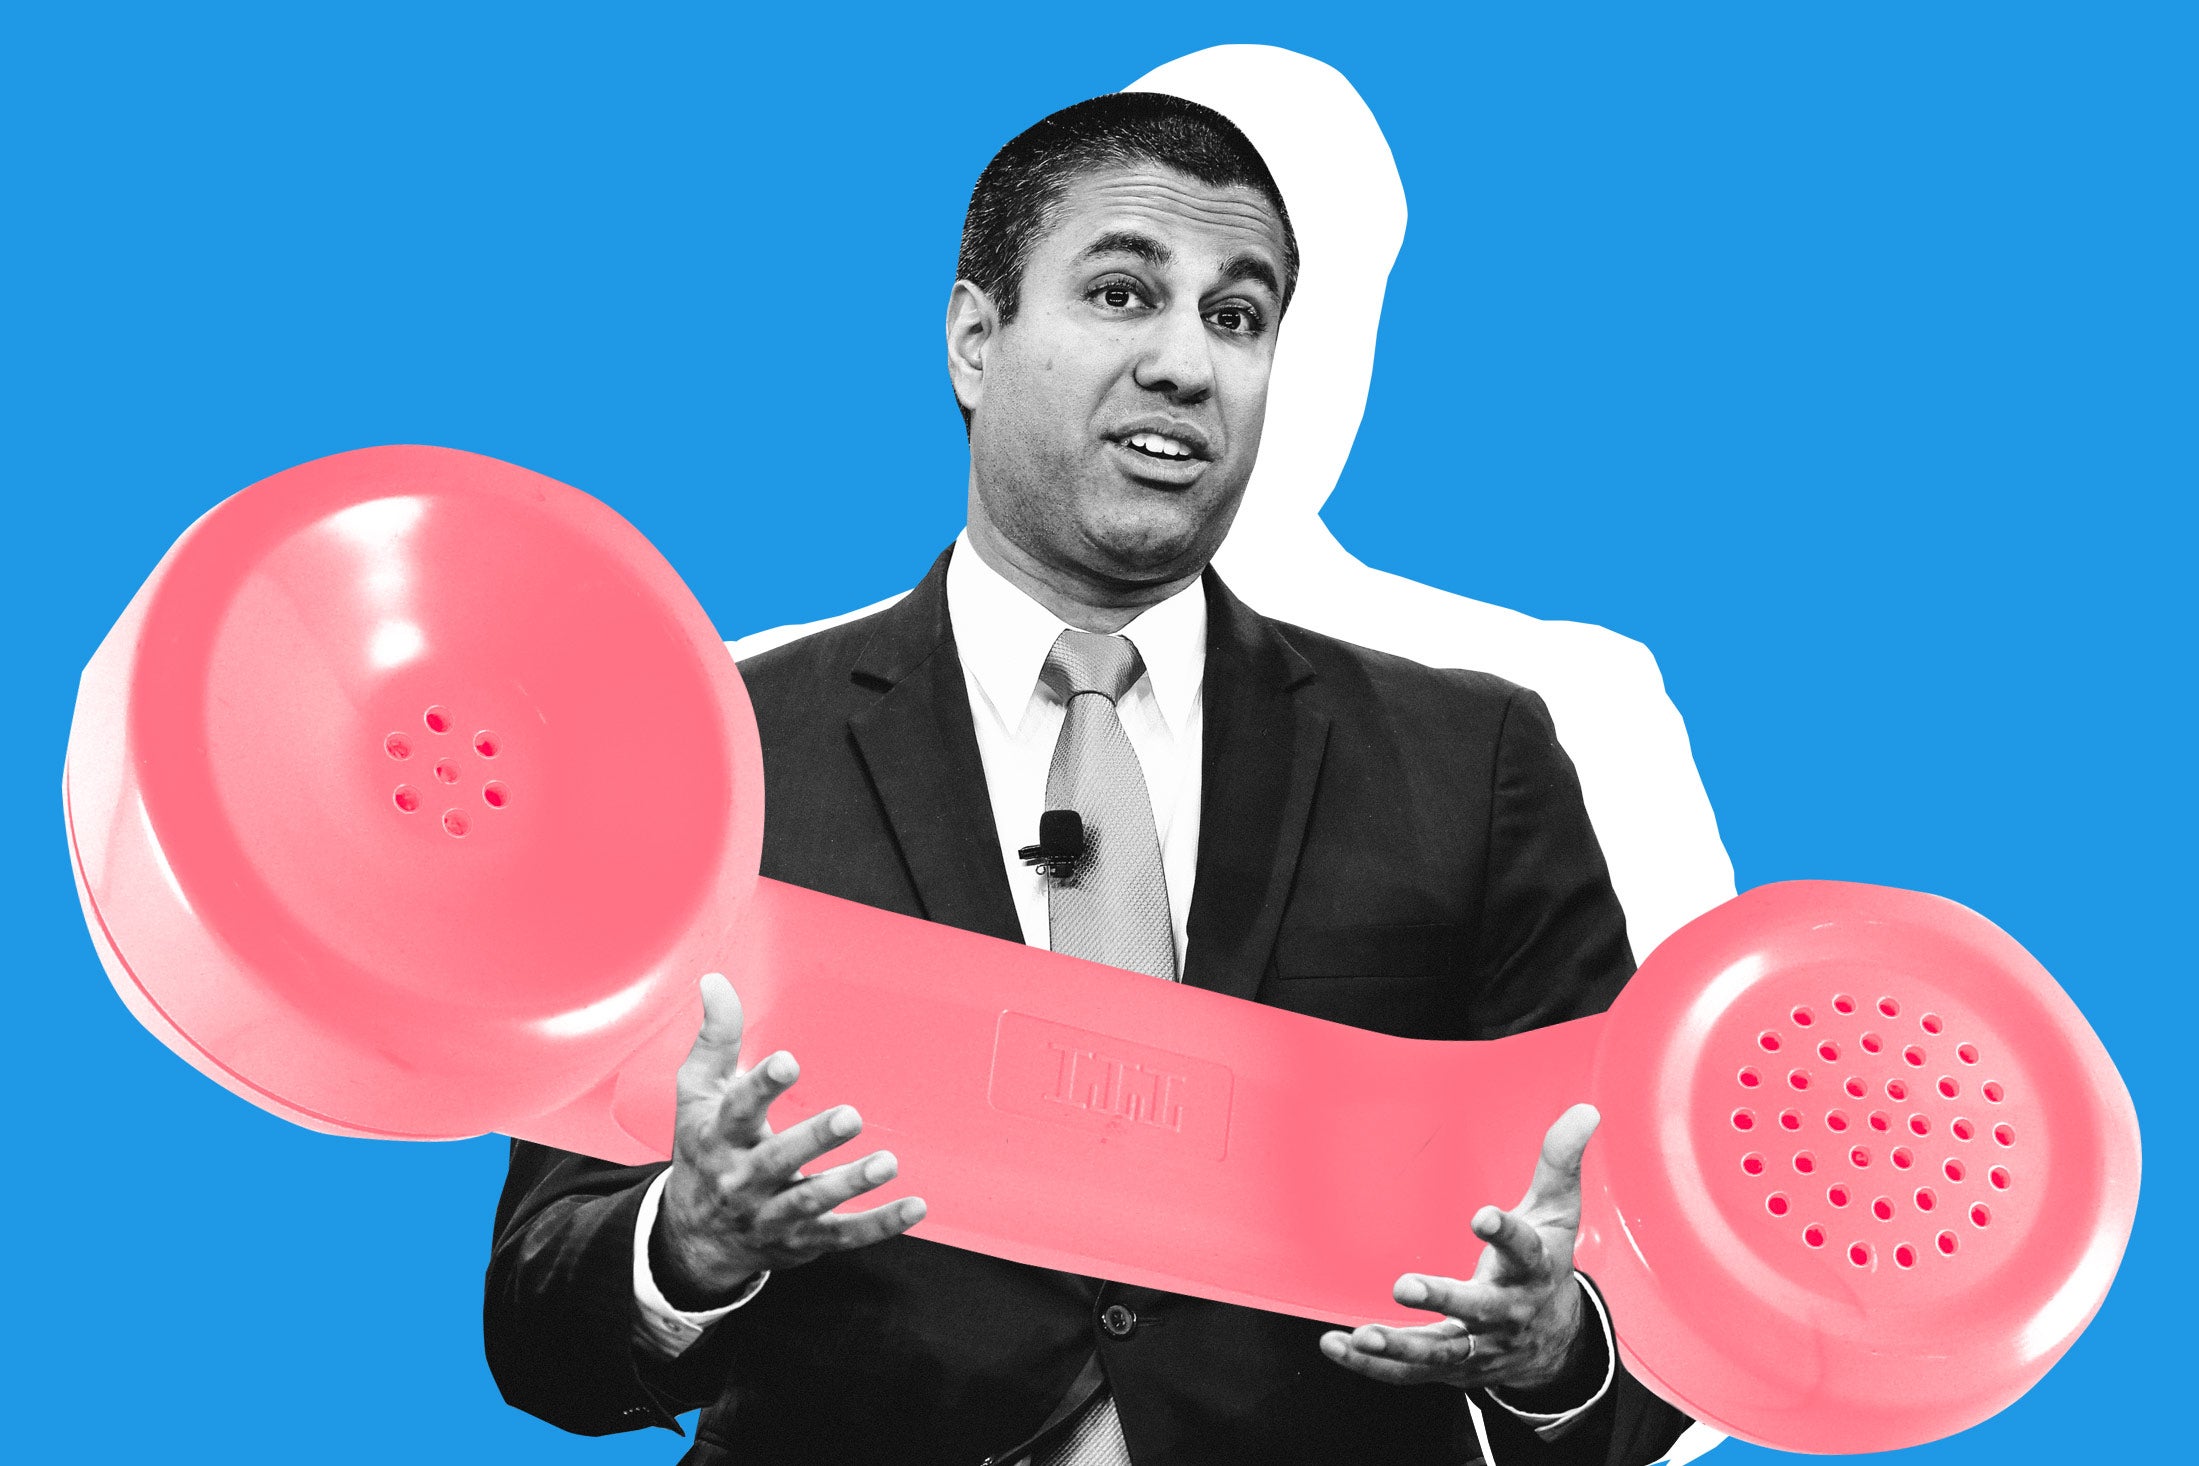 Ajit Pai holding a giant phone receiver.